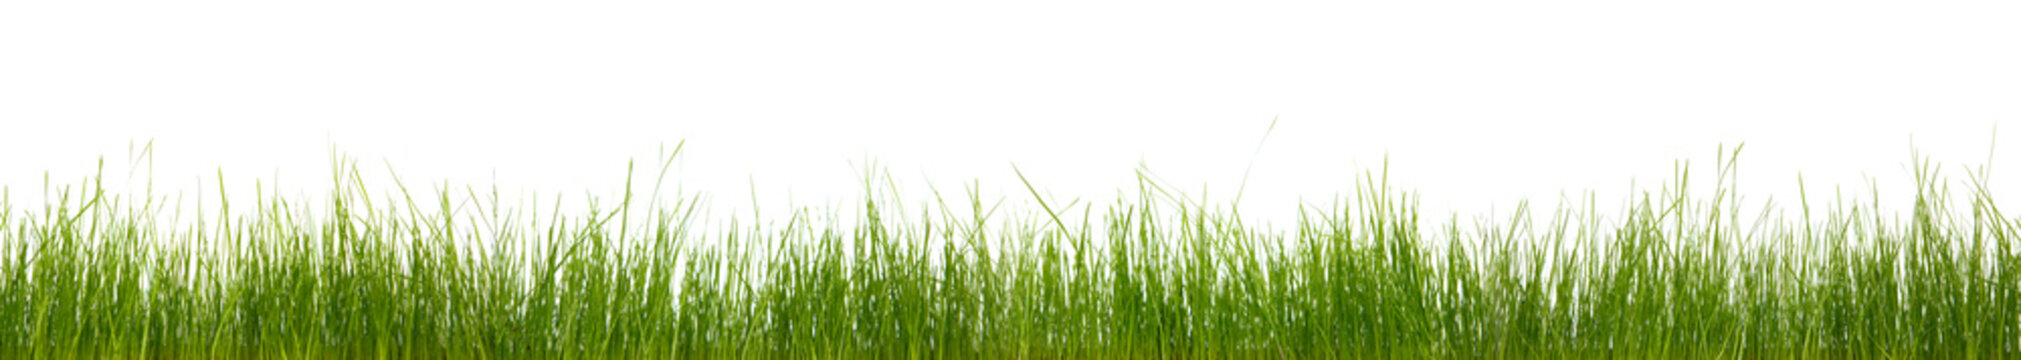 Extra large horizontal strip of grass, dirt, and roots isolated